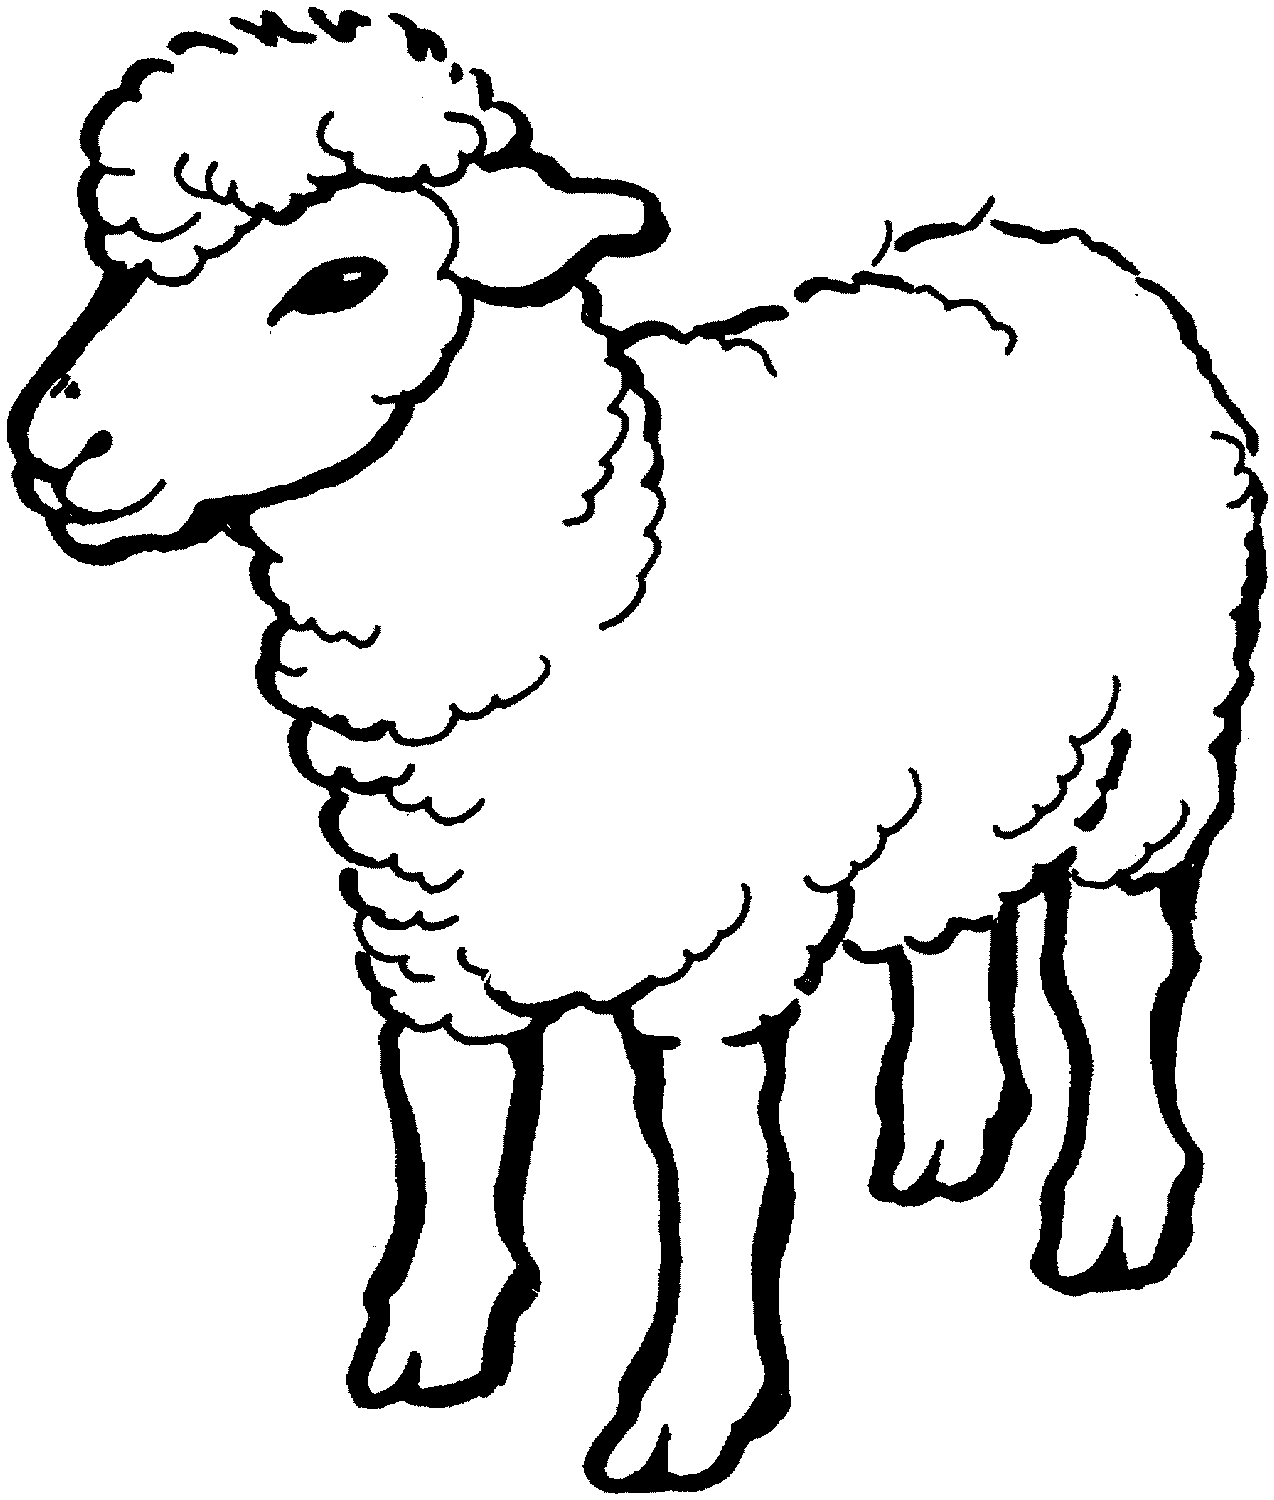 Sheep Coloring Pages   New Calendar Template Site